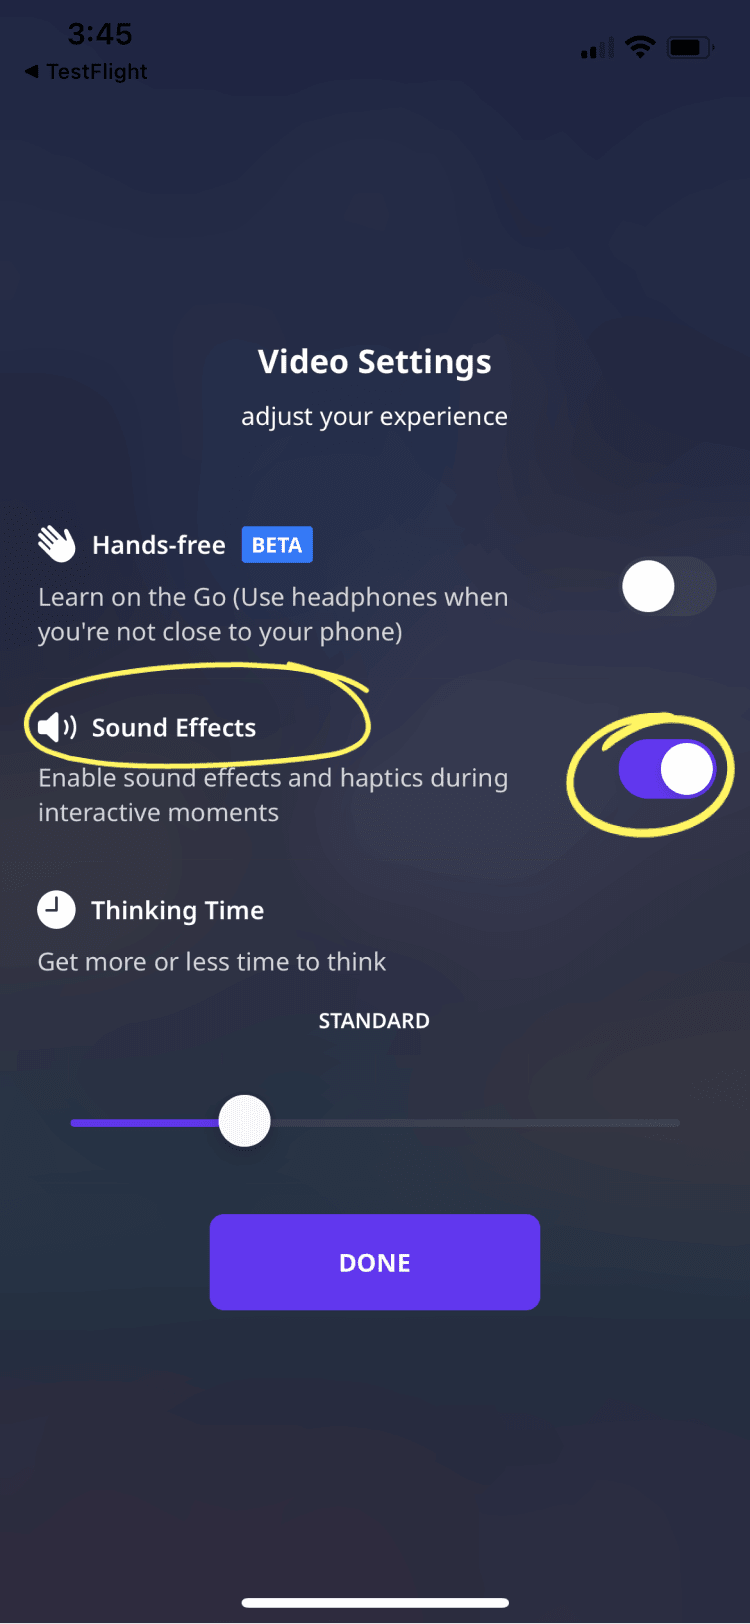 Kleo app Video Settings with Sound Effects toggle circled in yellow for demonstration.